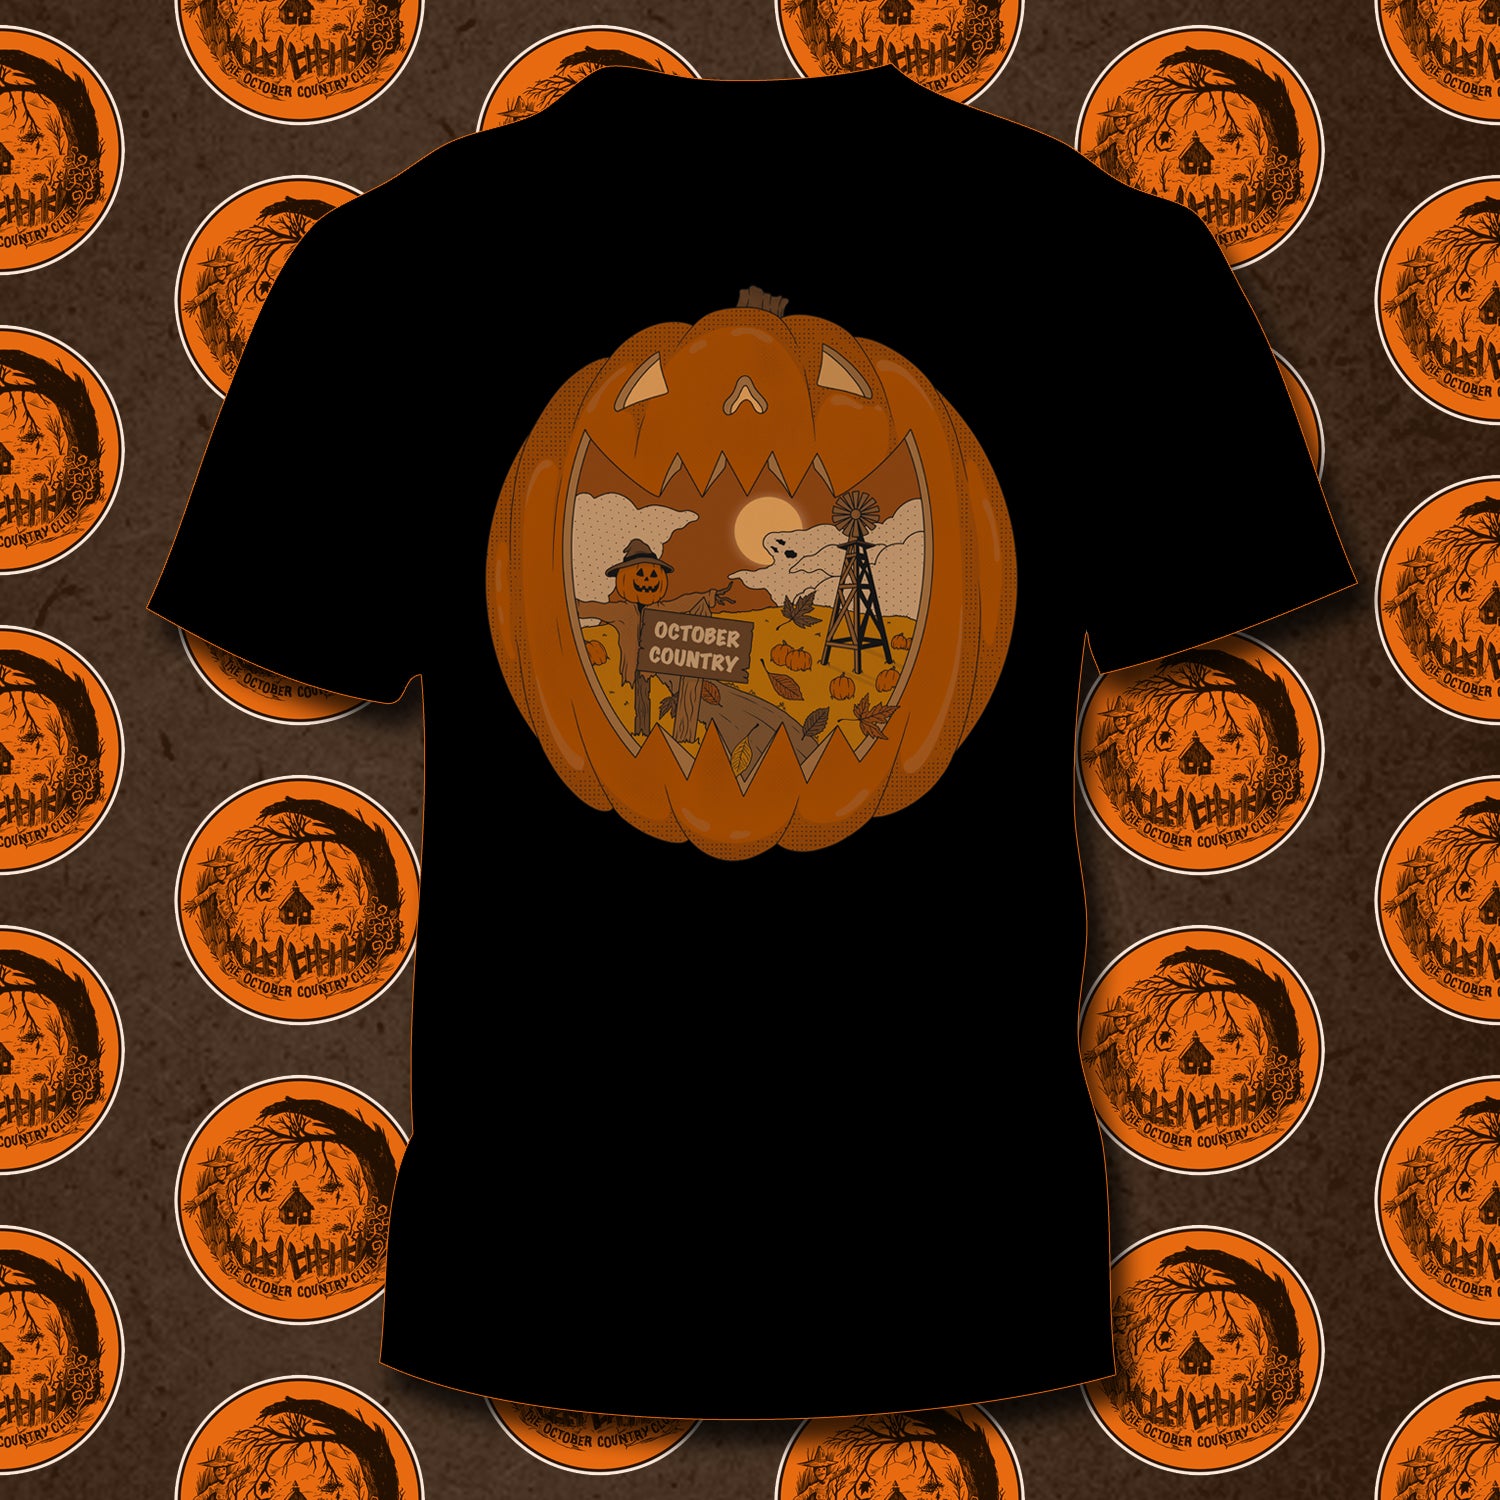 THE OCTOBER COUNTRY T-SHIRT